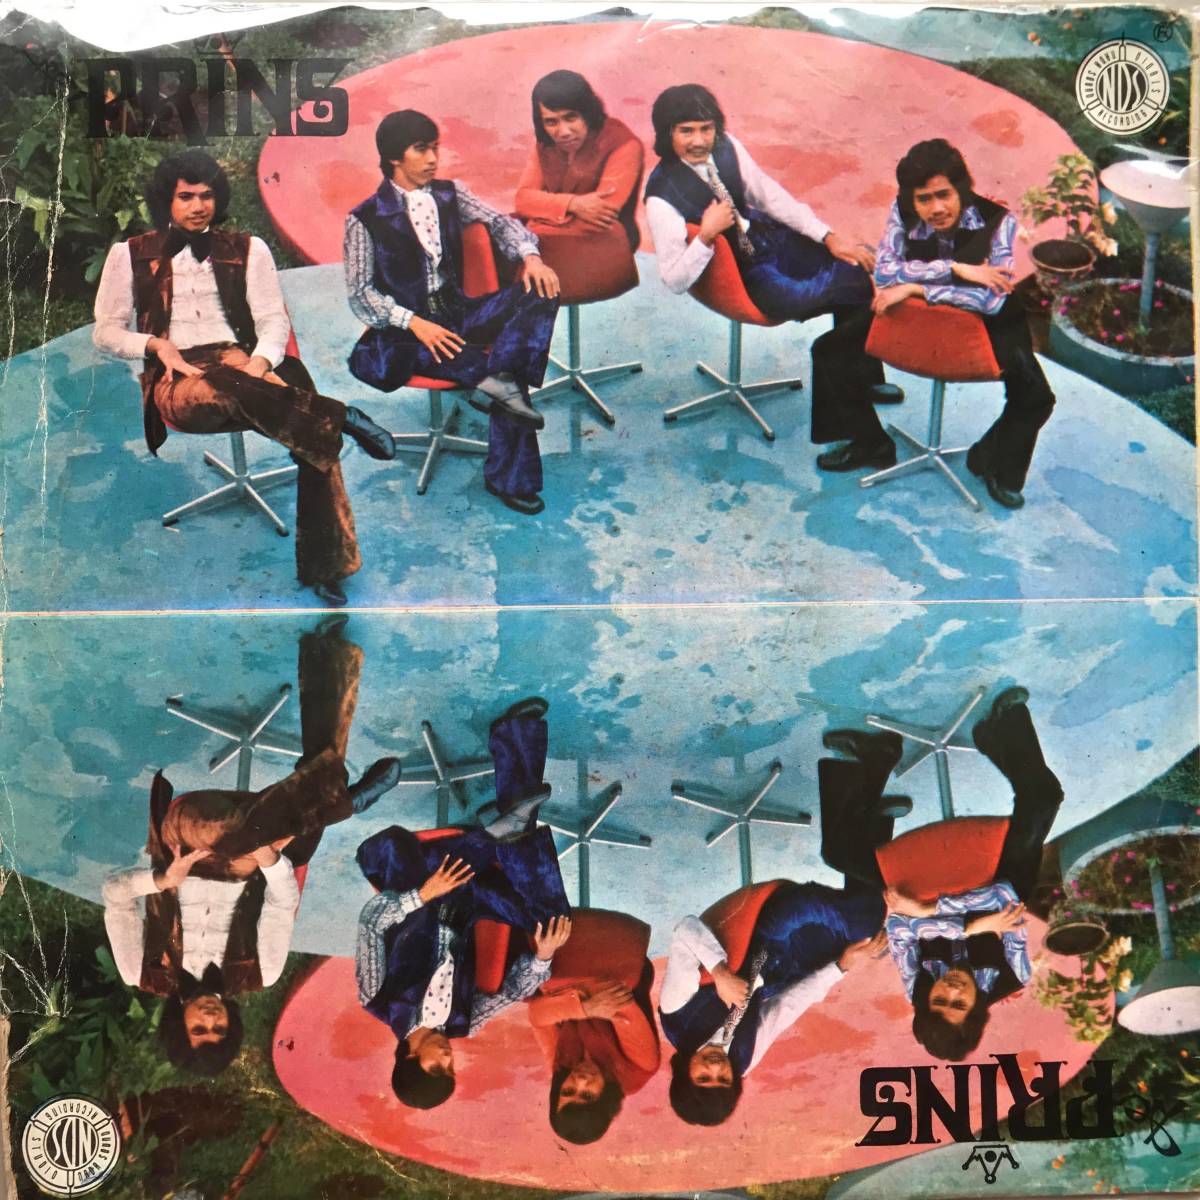 LP Indonesia[ De Prins ]Tropical Island Psychedelic Funky Fuzz Rock Beat Pop 70\'s Indonesia rare record 